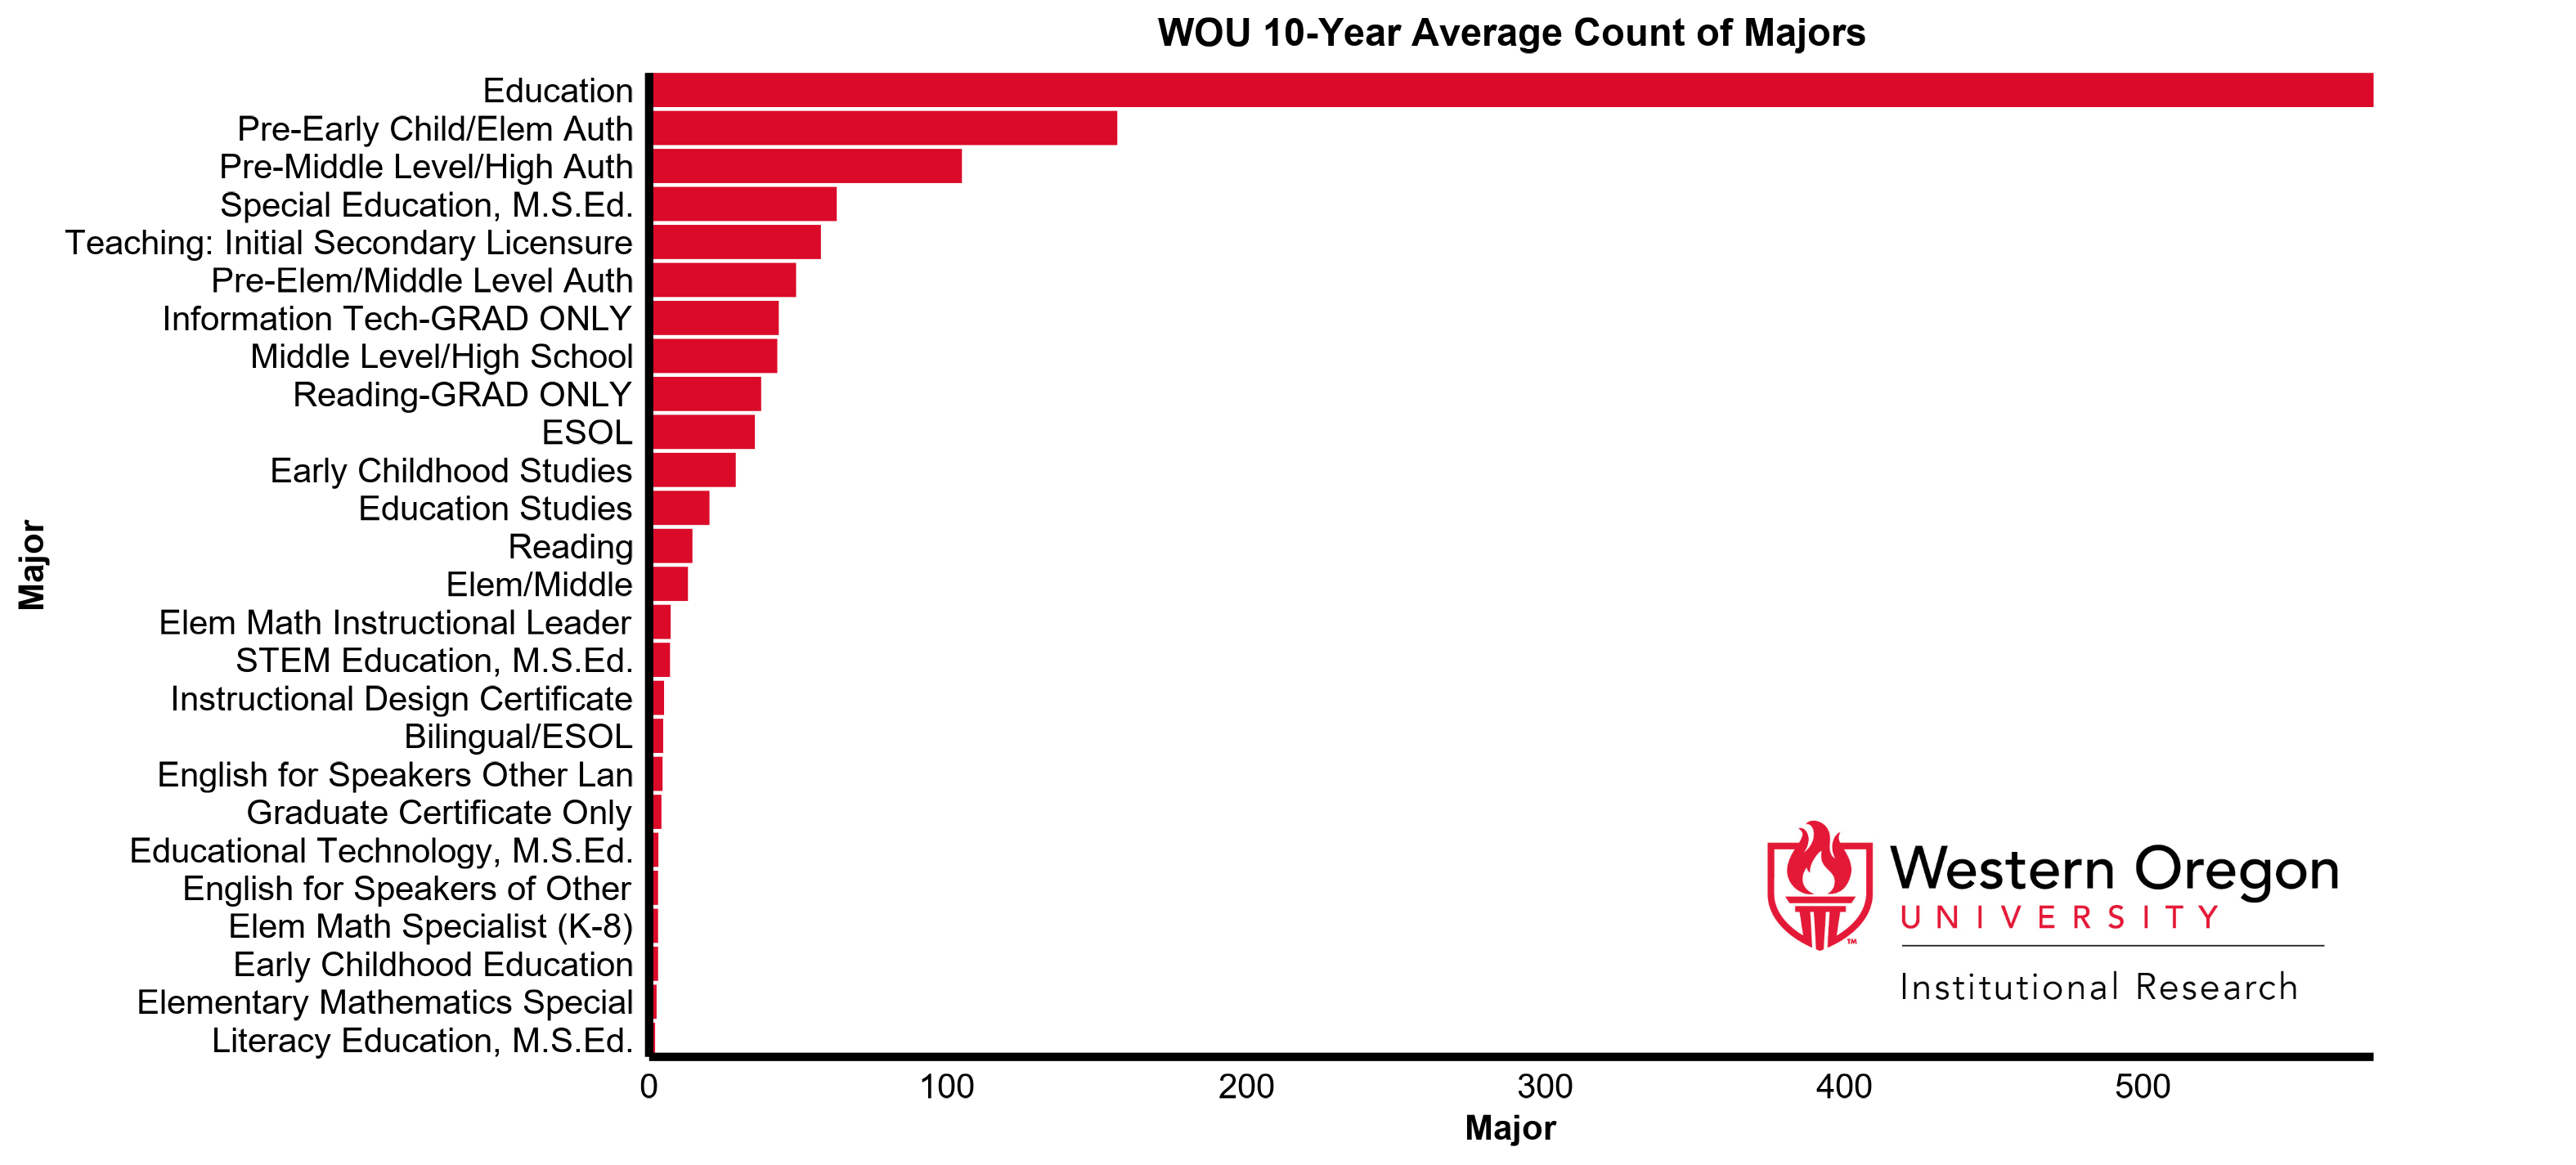 Bar graph of the 10-year average count of majors at WOU for the Education and Leadership division